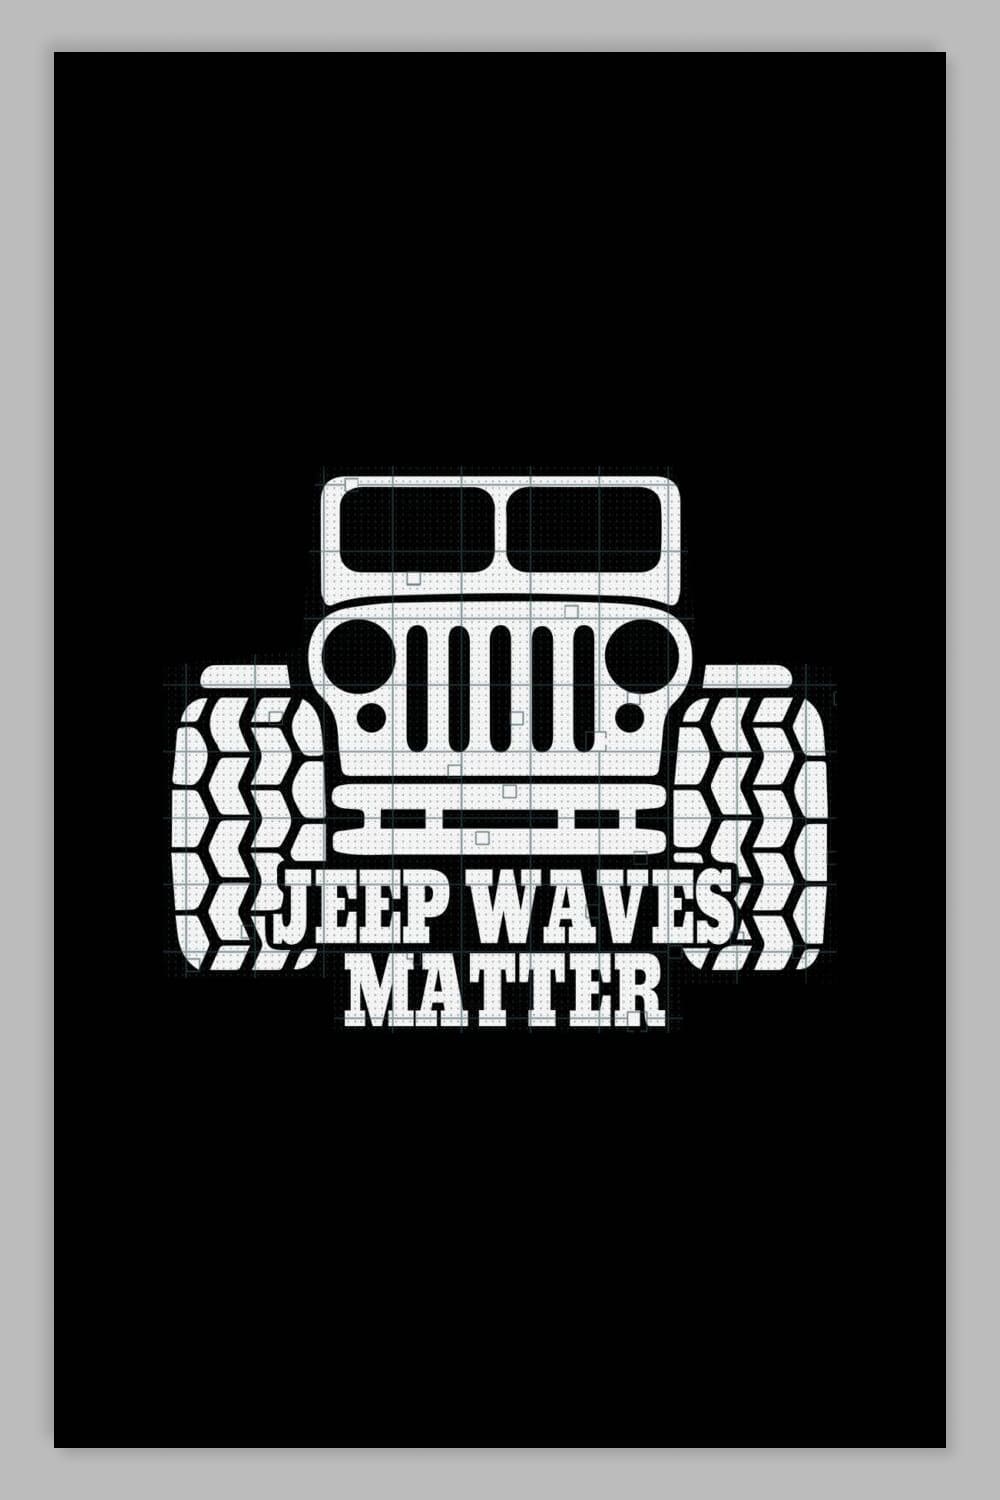 Jeep Wrangler in front in a minimalist style.